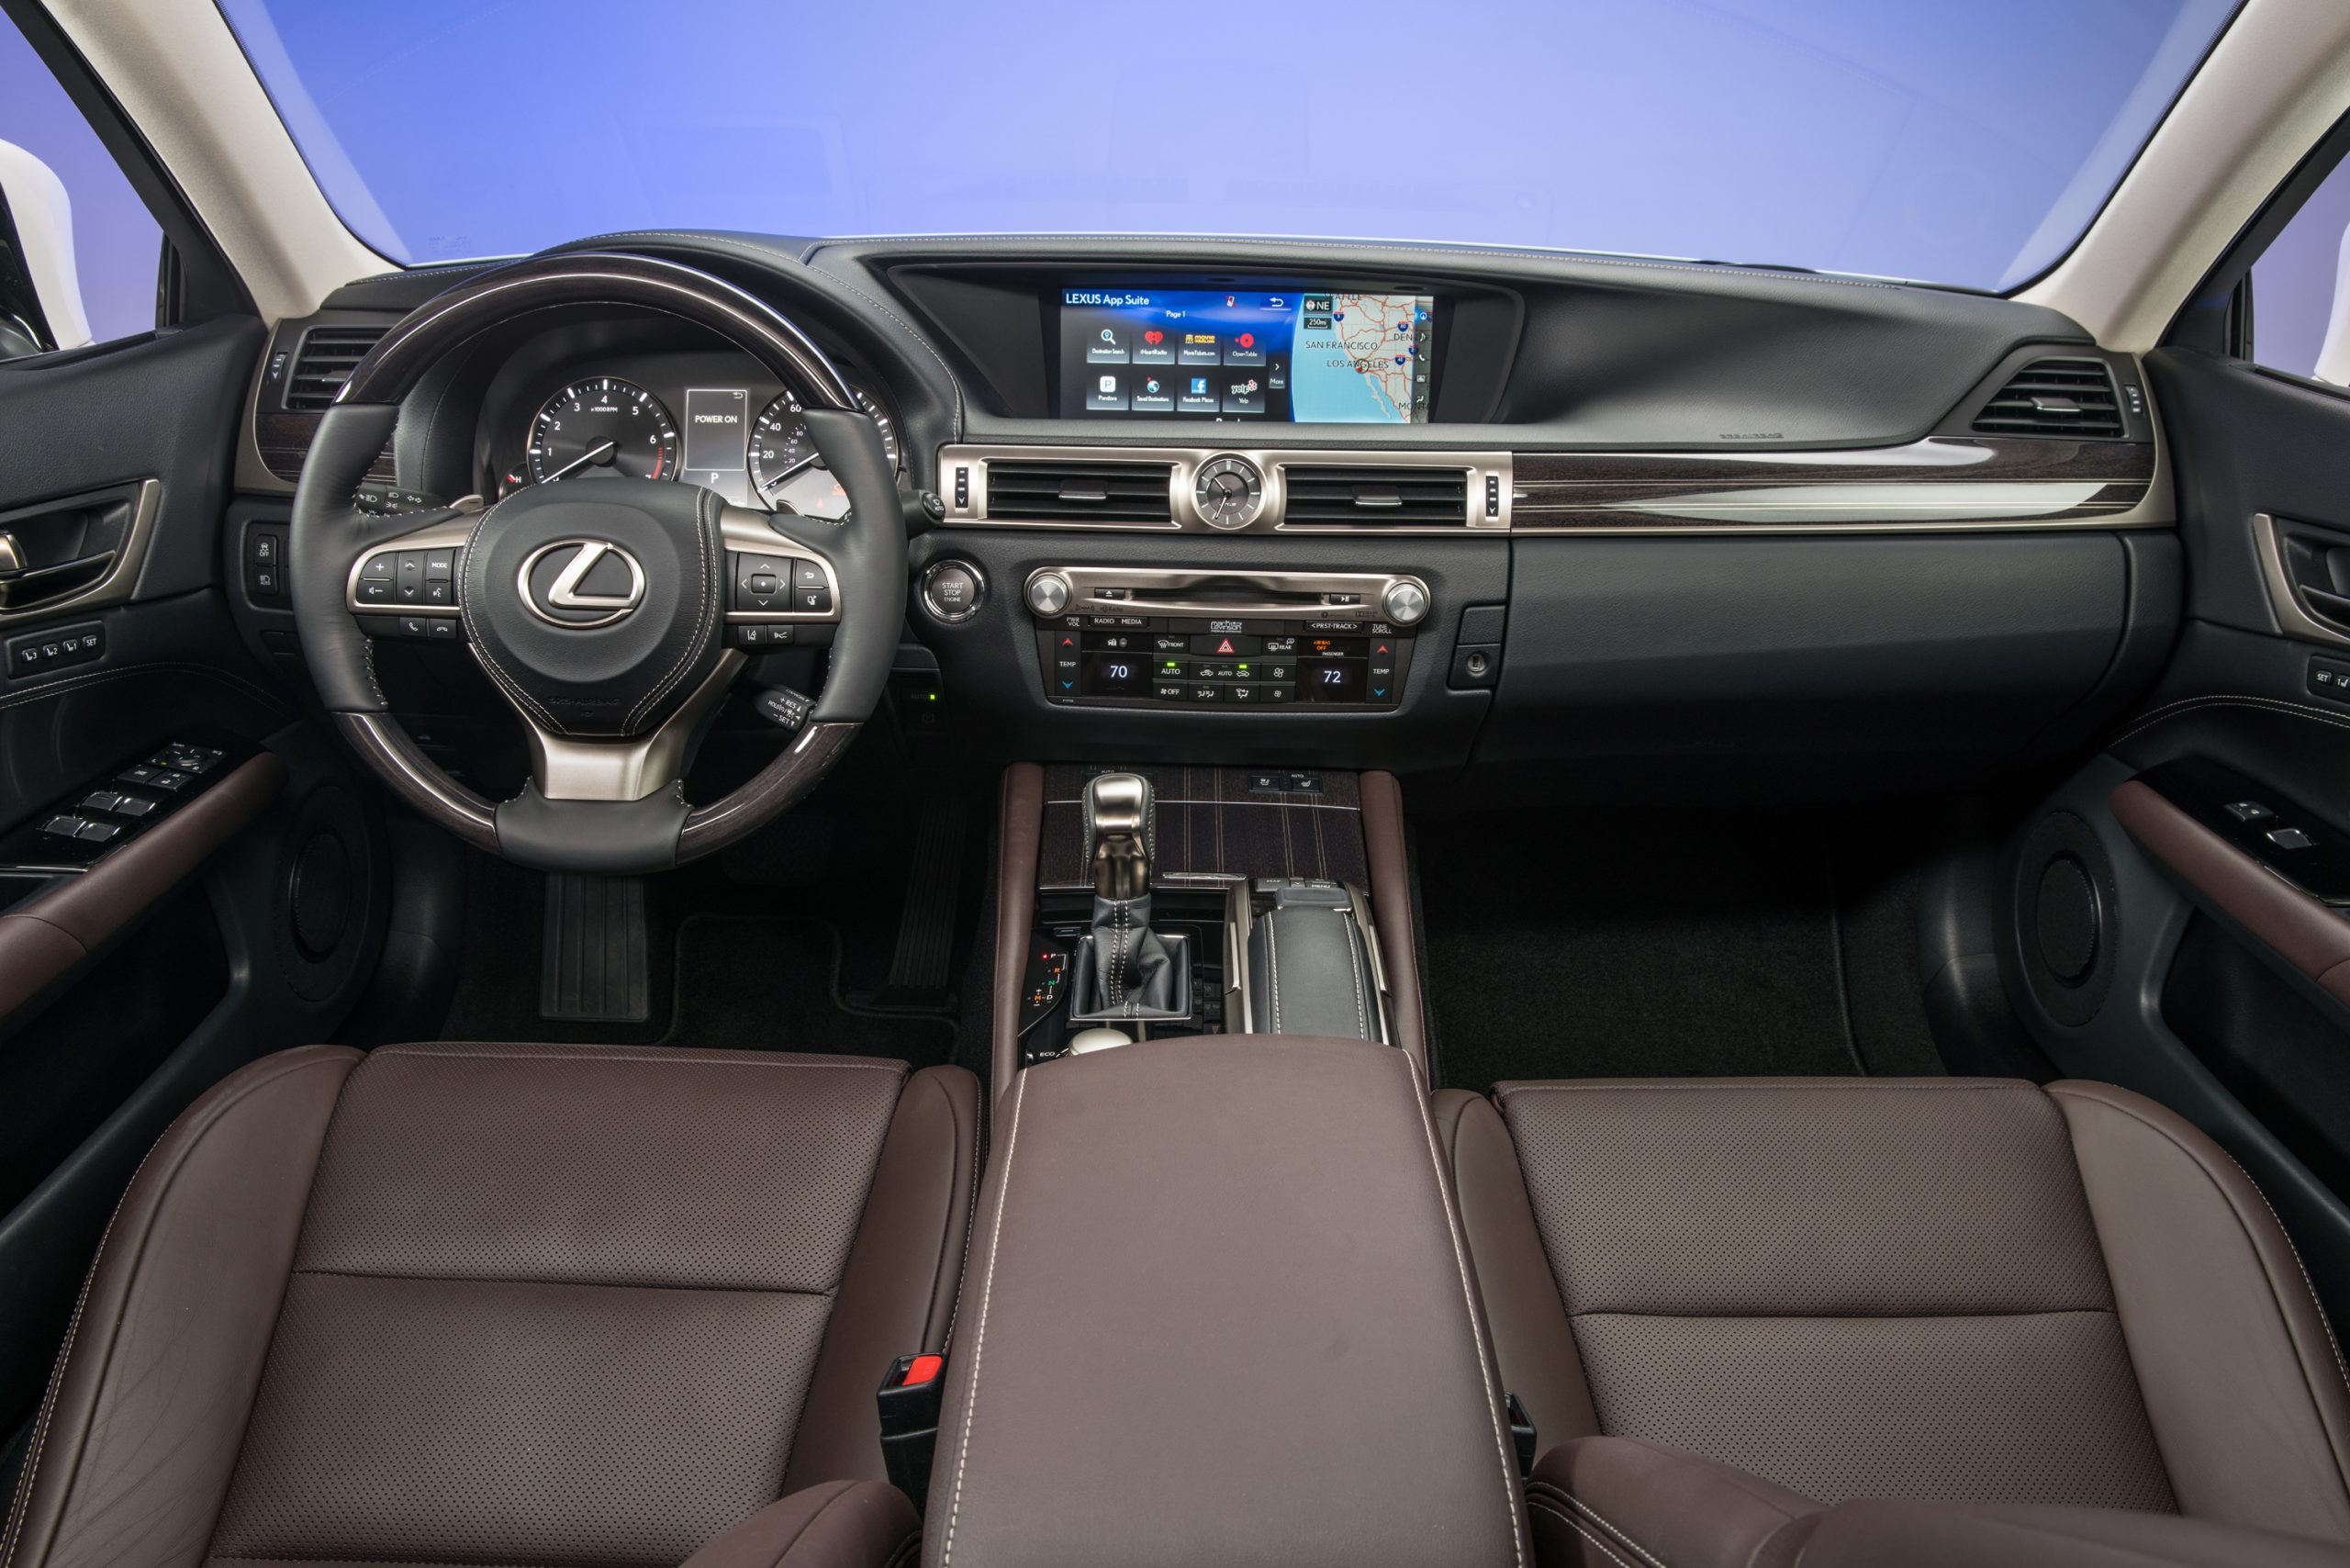 The brown leather interior of the Lexus GS